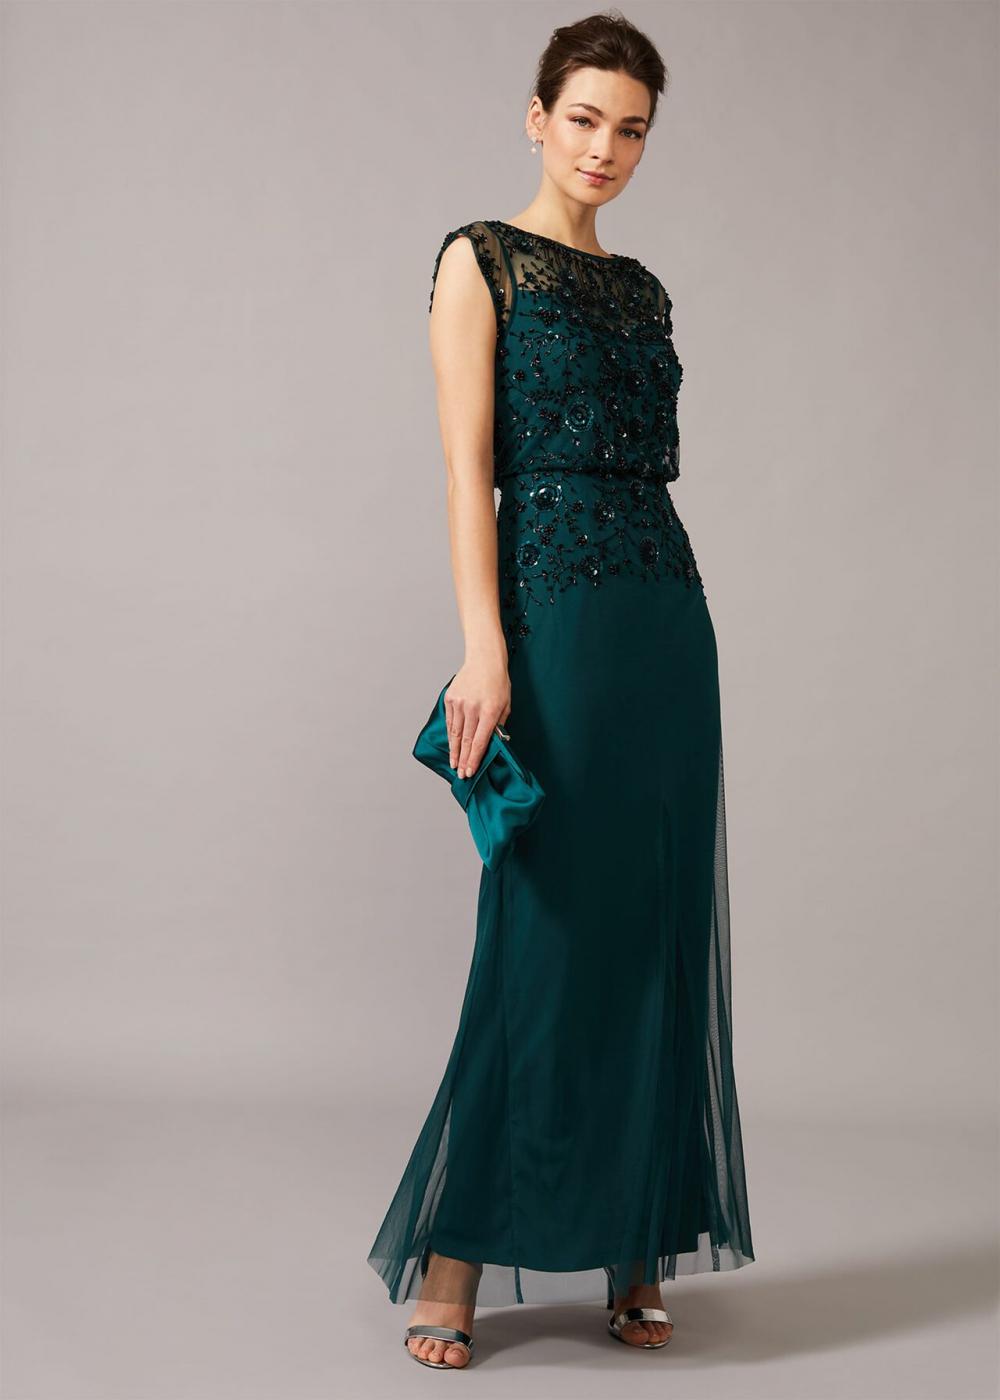 Elan Sequinned Dress Jade | Phase Eight Womens Occasion Dresses